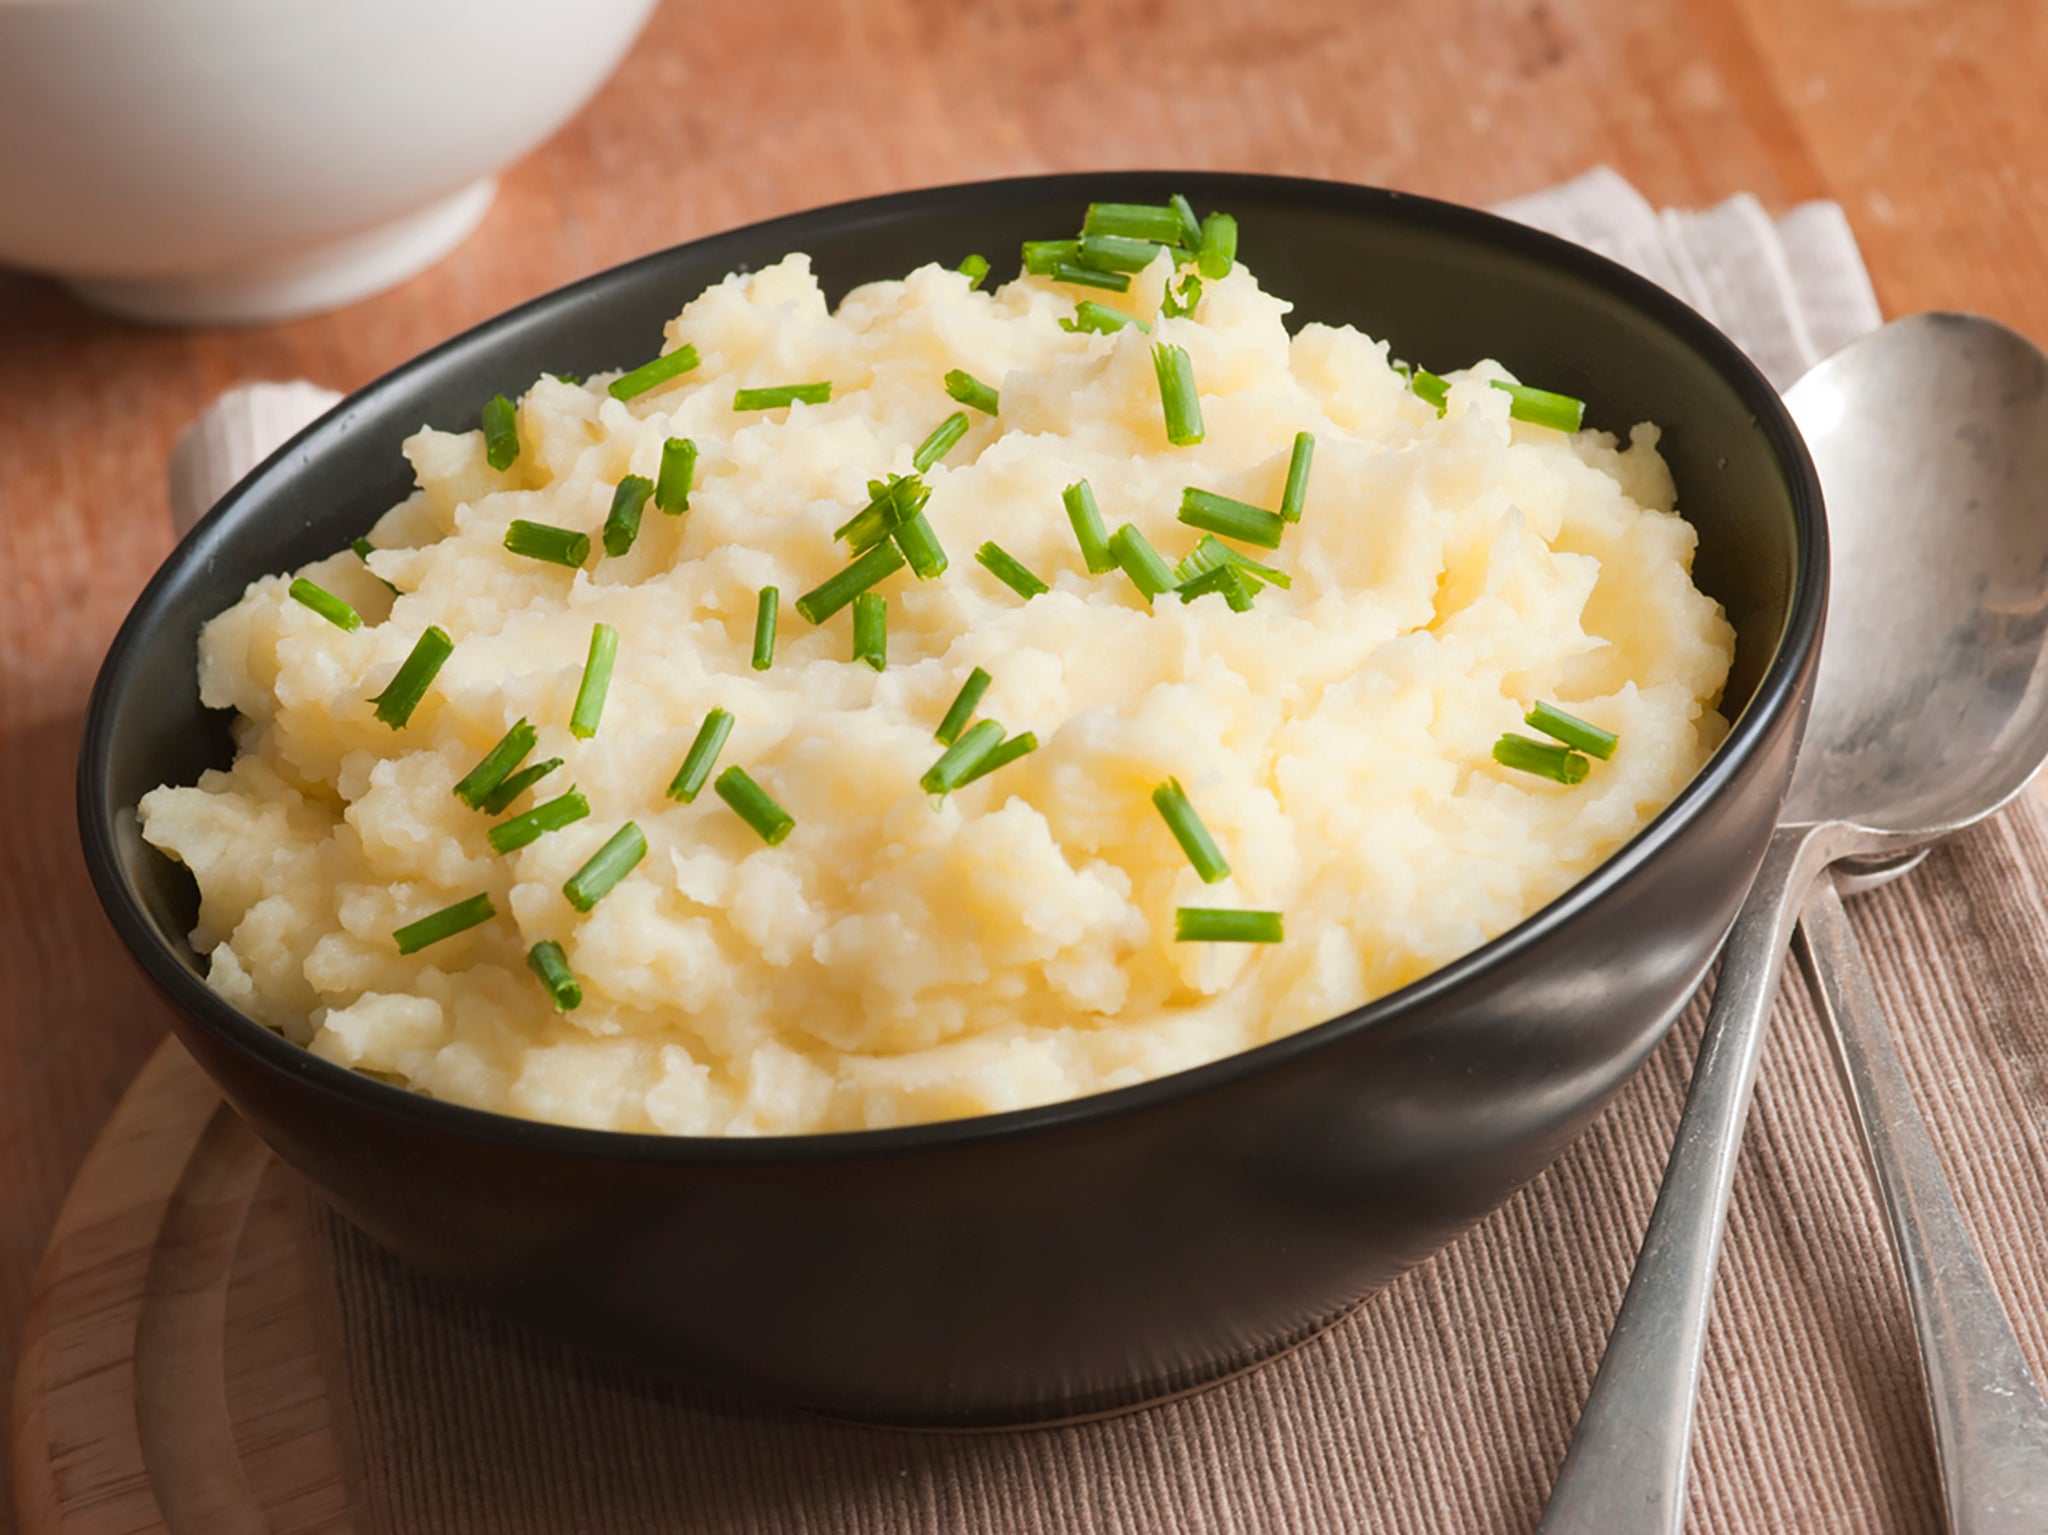 Creamy and rich mashed potatoes made with air-fried potatoes for a unique roasted flavour